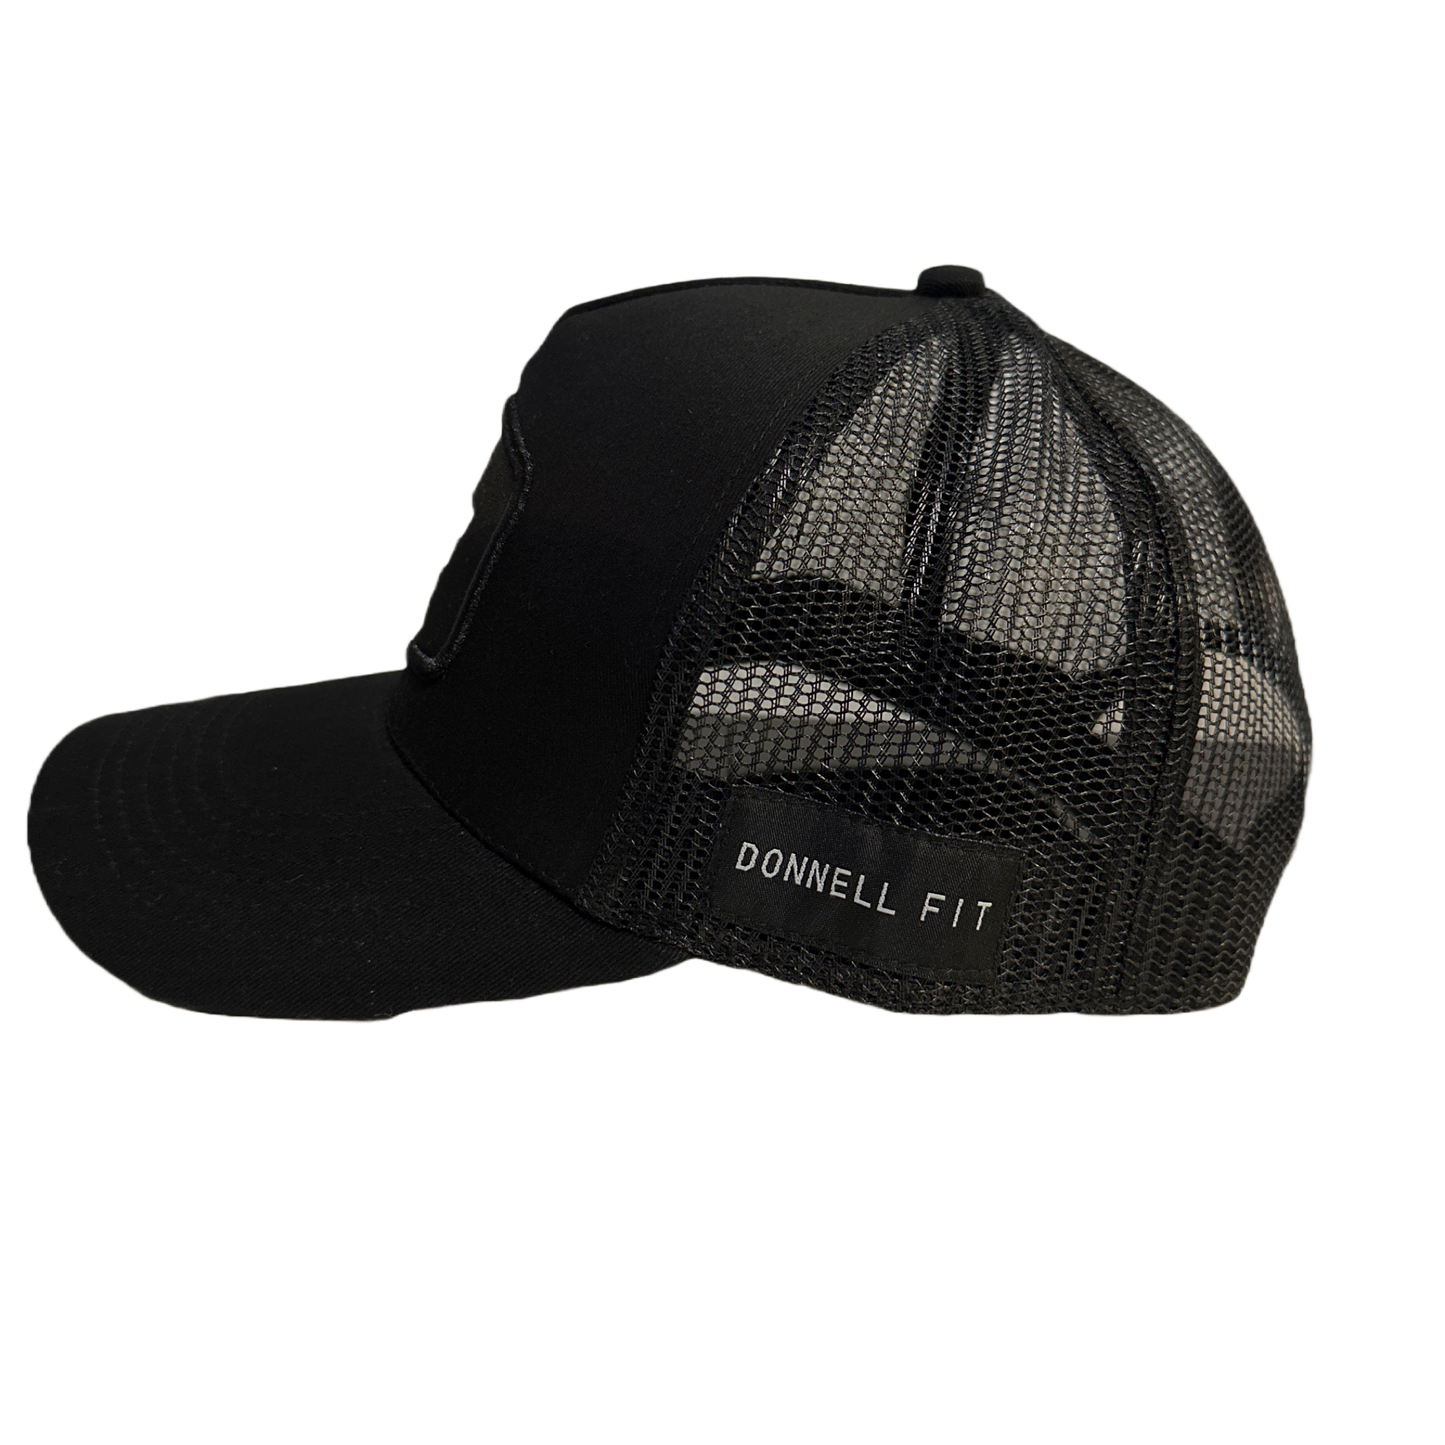 Donnell Fit Mesh Hat